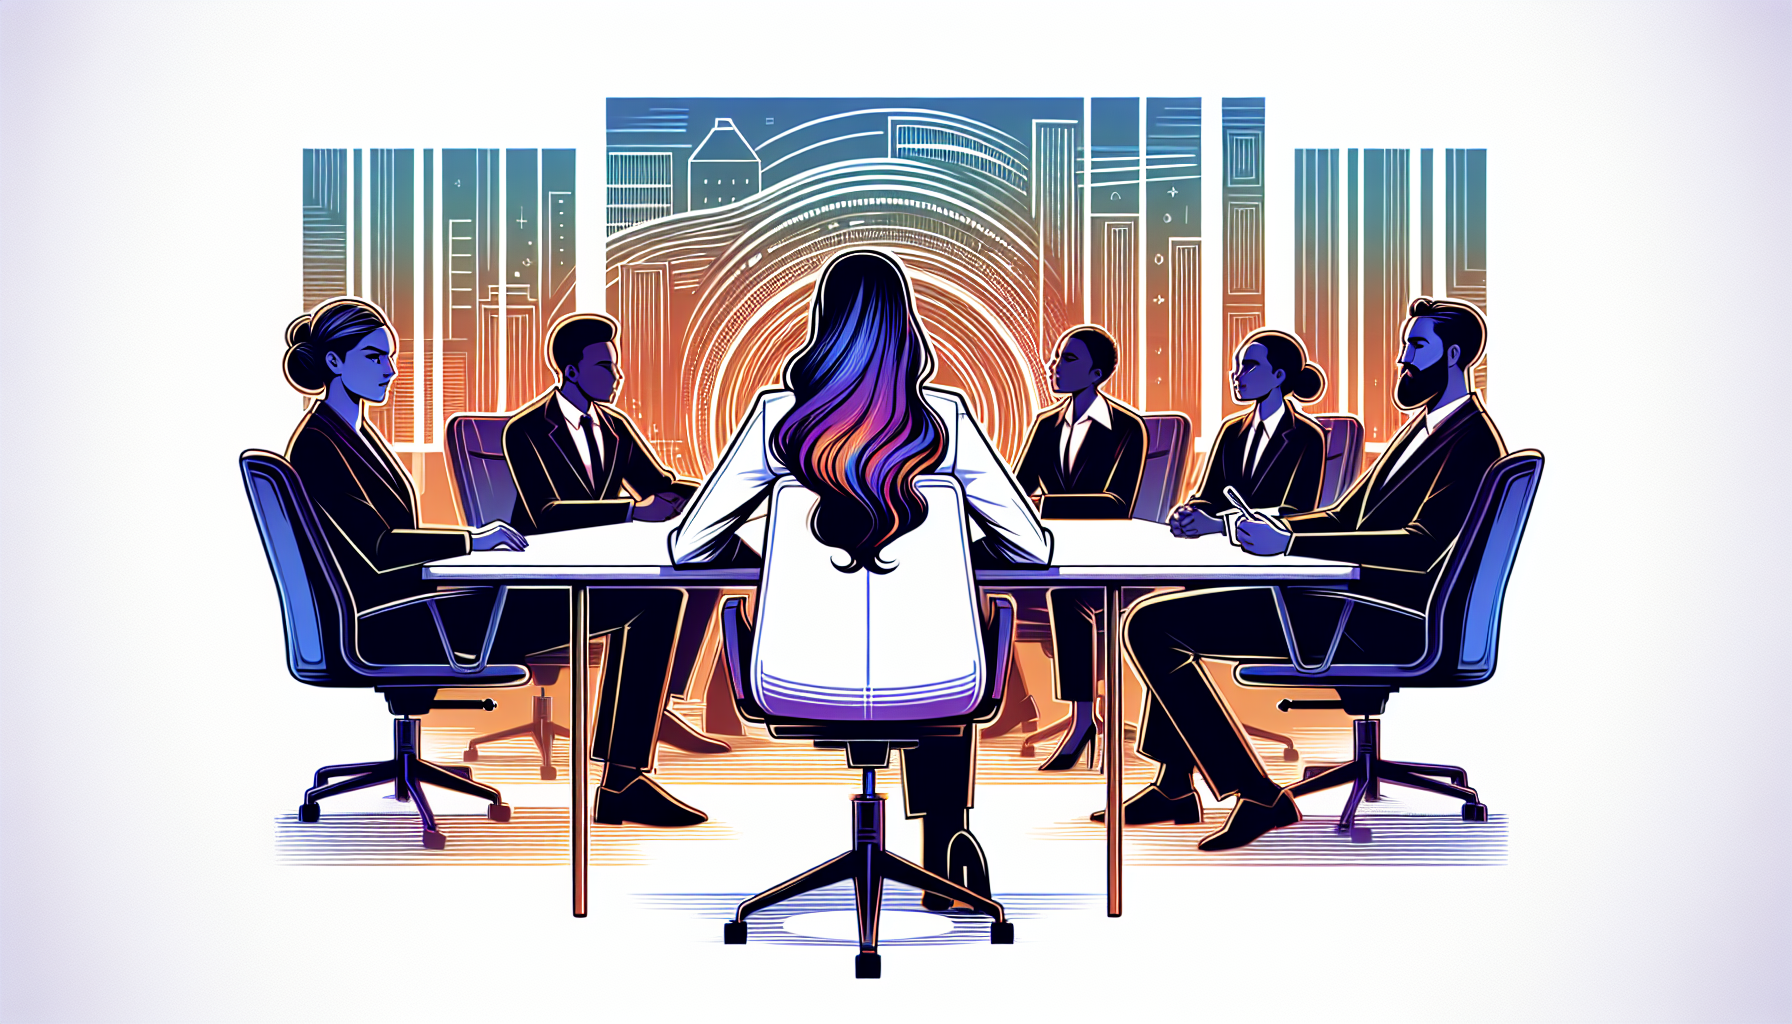 A woman sitting at a conference table with men, symbolizing women's empowerment in the workforce